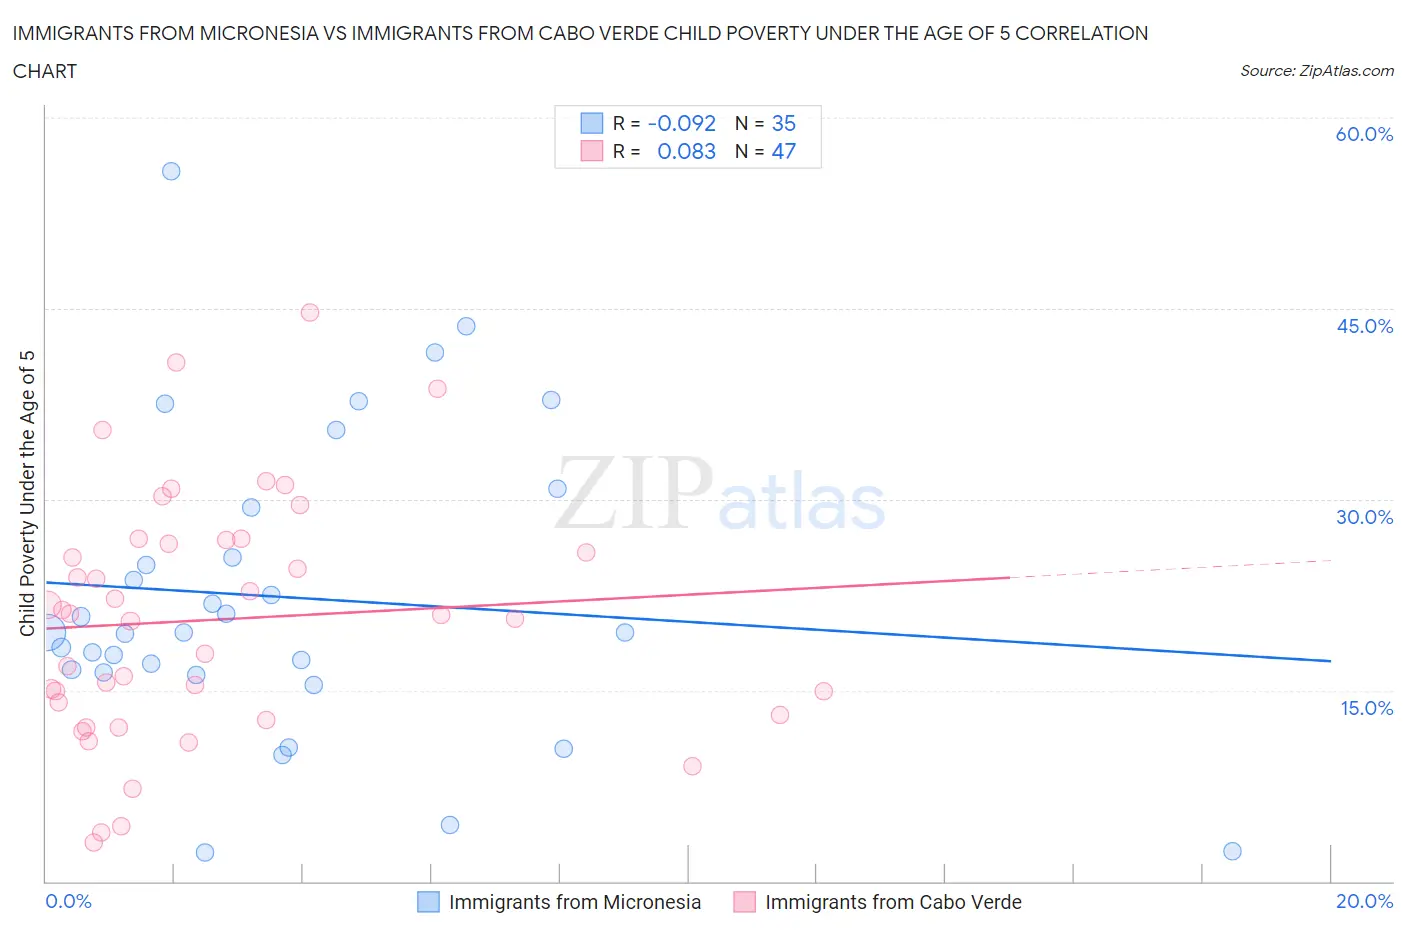 Immigrants from Micronesia vs Immigrants from Cabo Verde Child Poverty Under the Age of 5